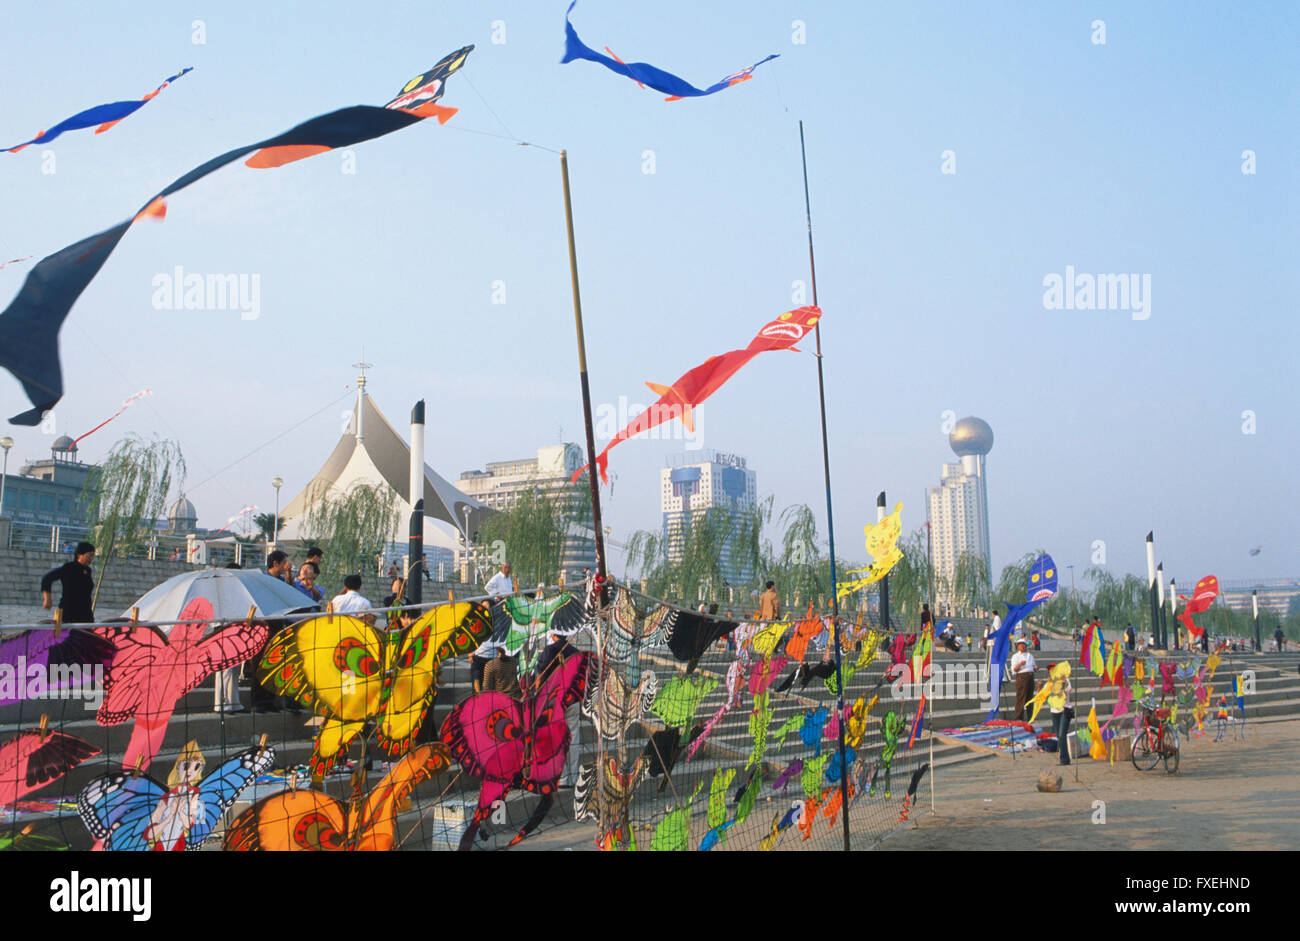 China, Hubei, Wuhan, Yangzi riverfront, colourful kites for sale blowing in the wind. Stock Photo